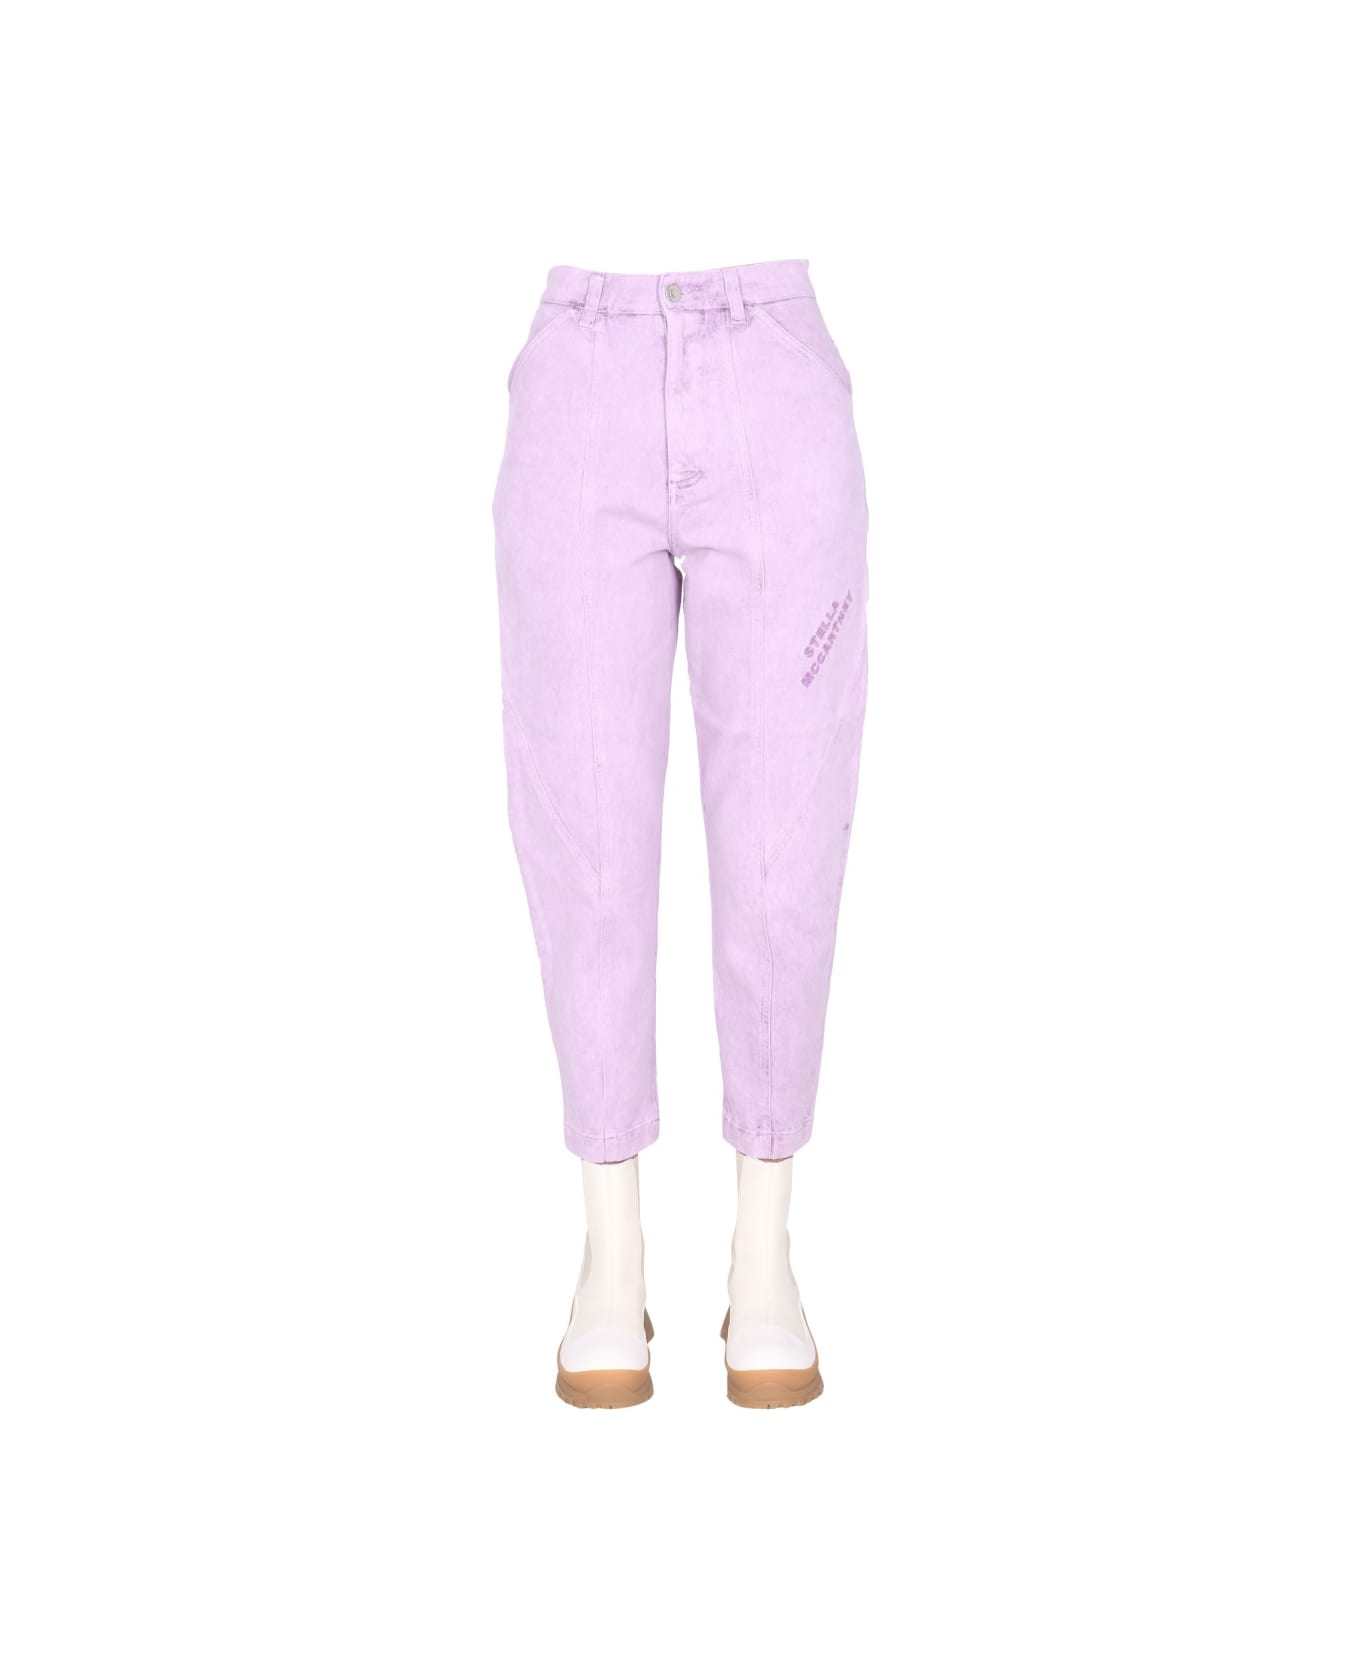 Stella McCartney Jeans With Embroidered Logo - LILAC ボトムス